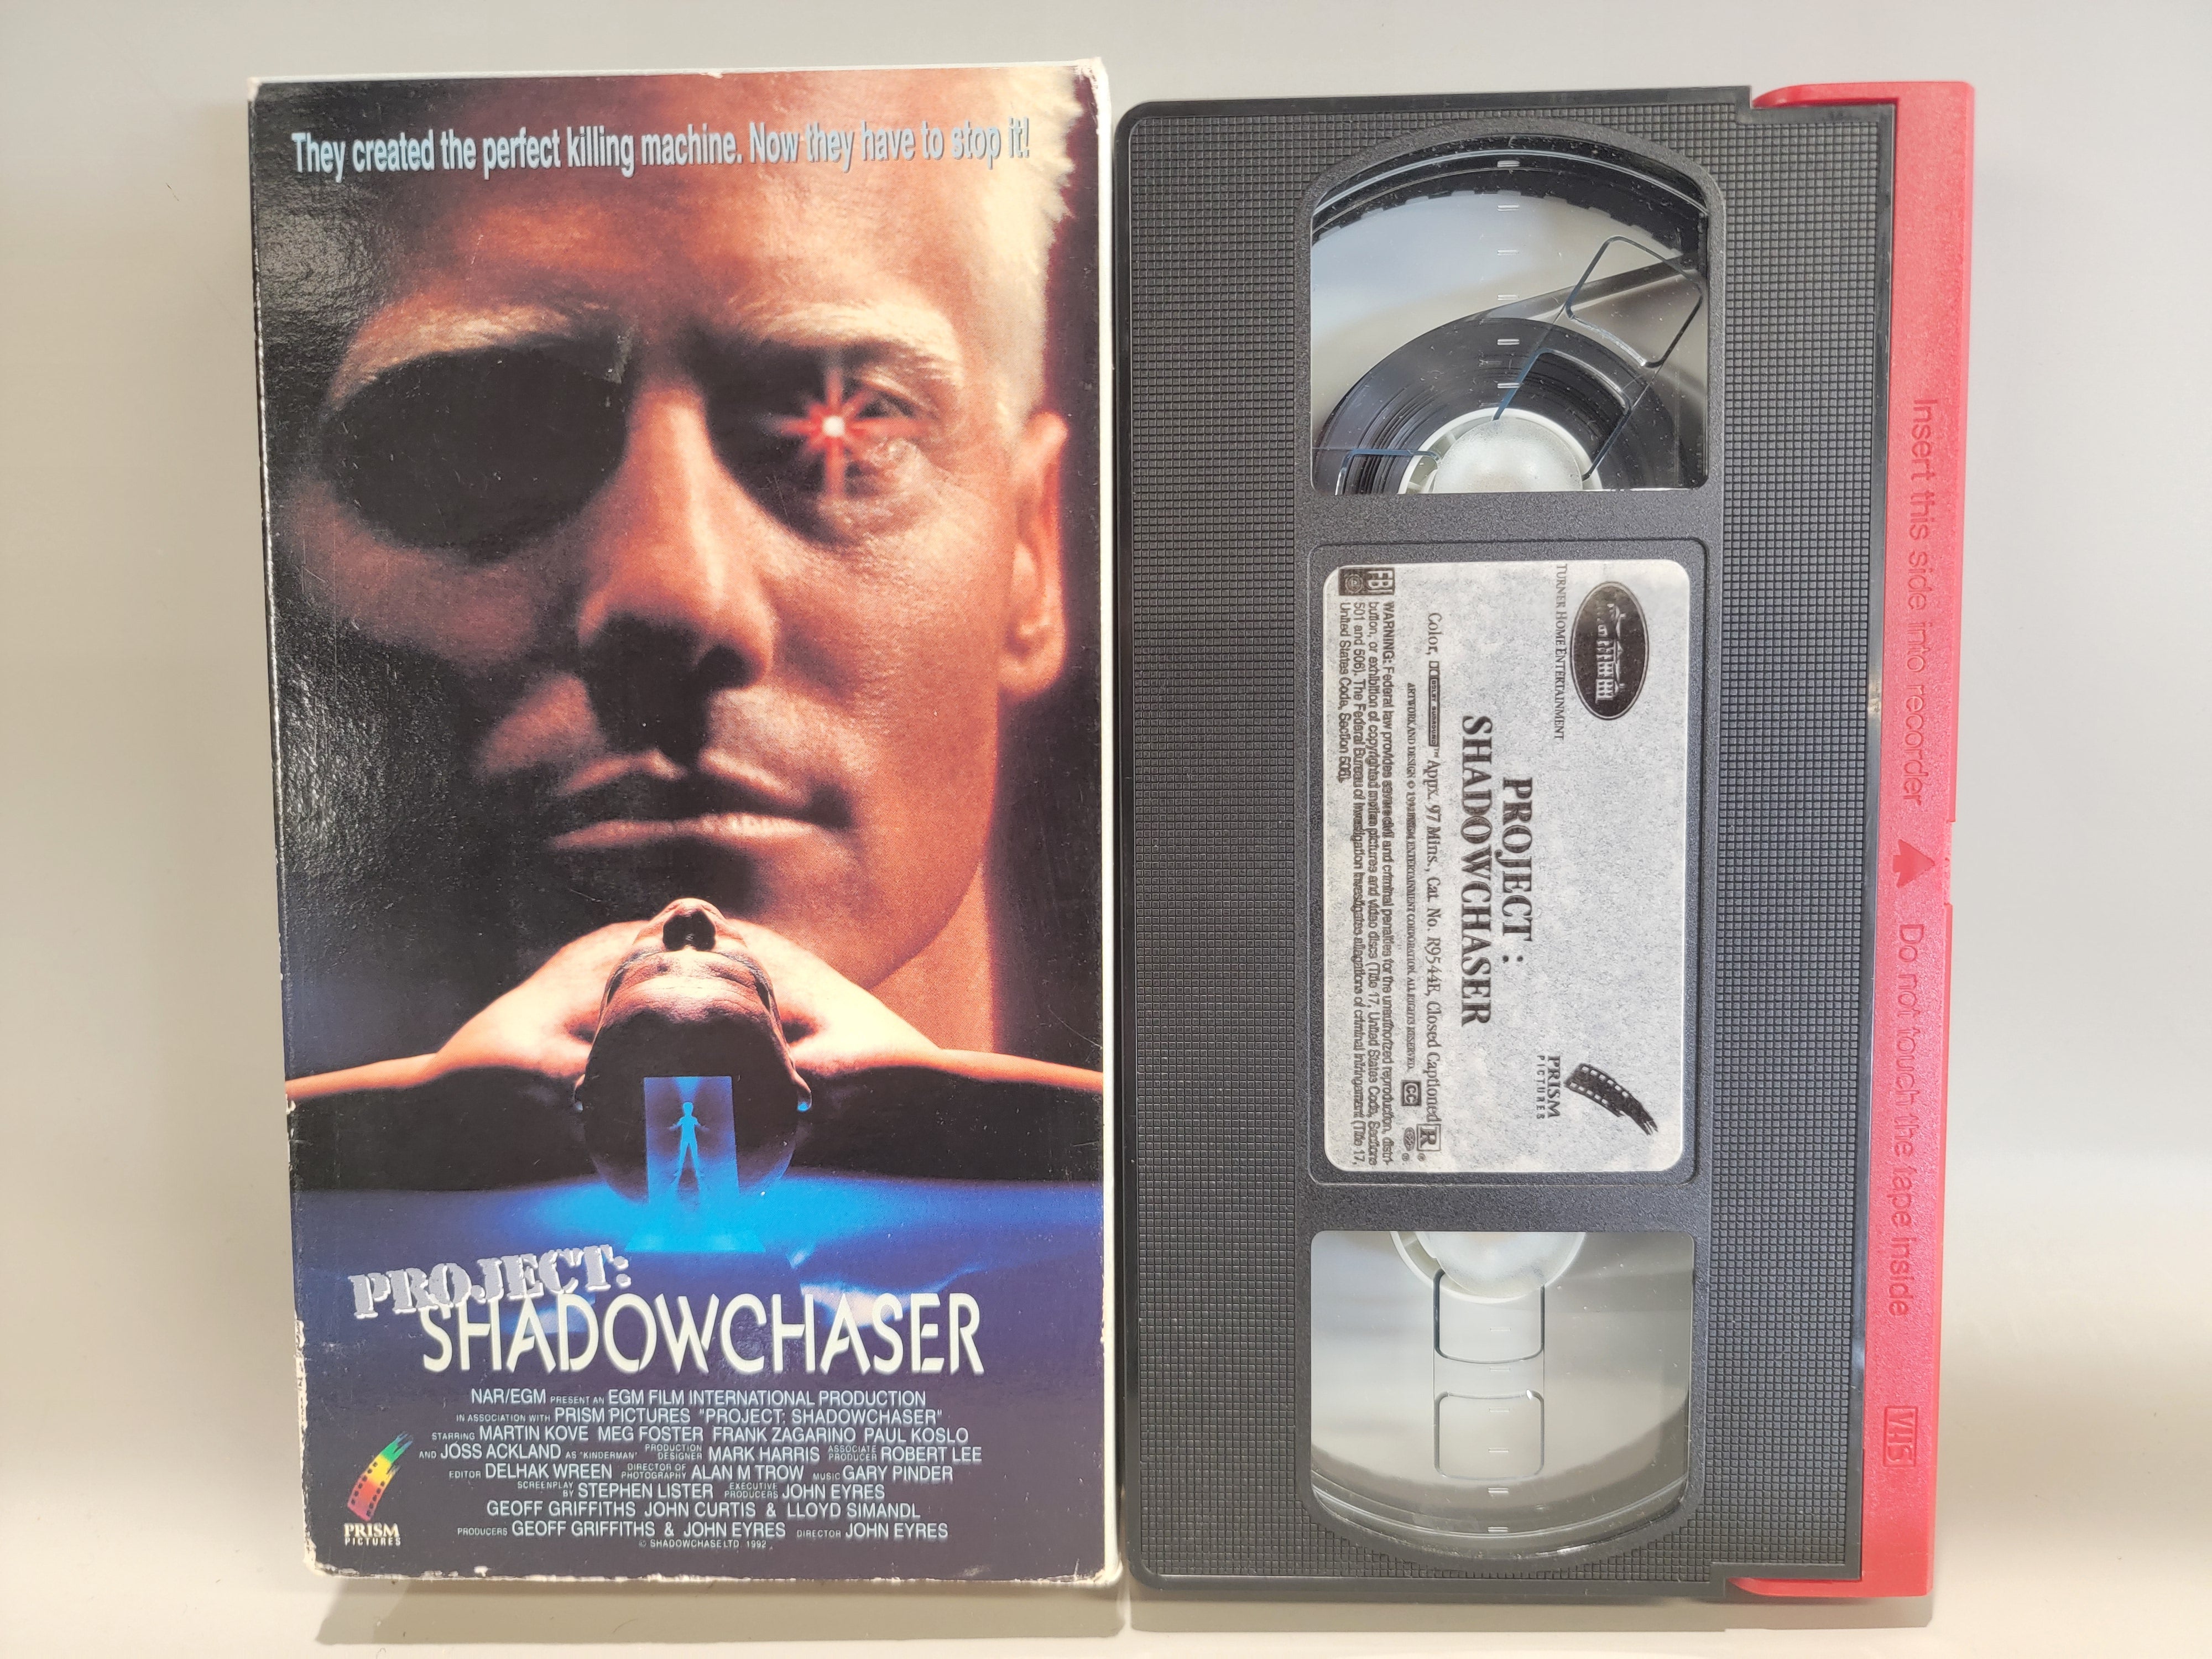 PROJECT: SHADOWCHASER VHS [USED]